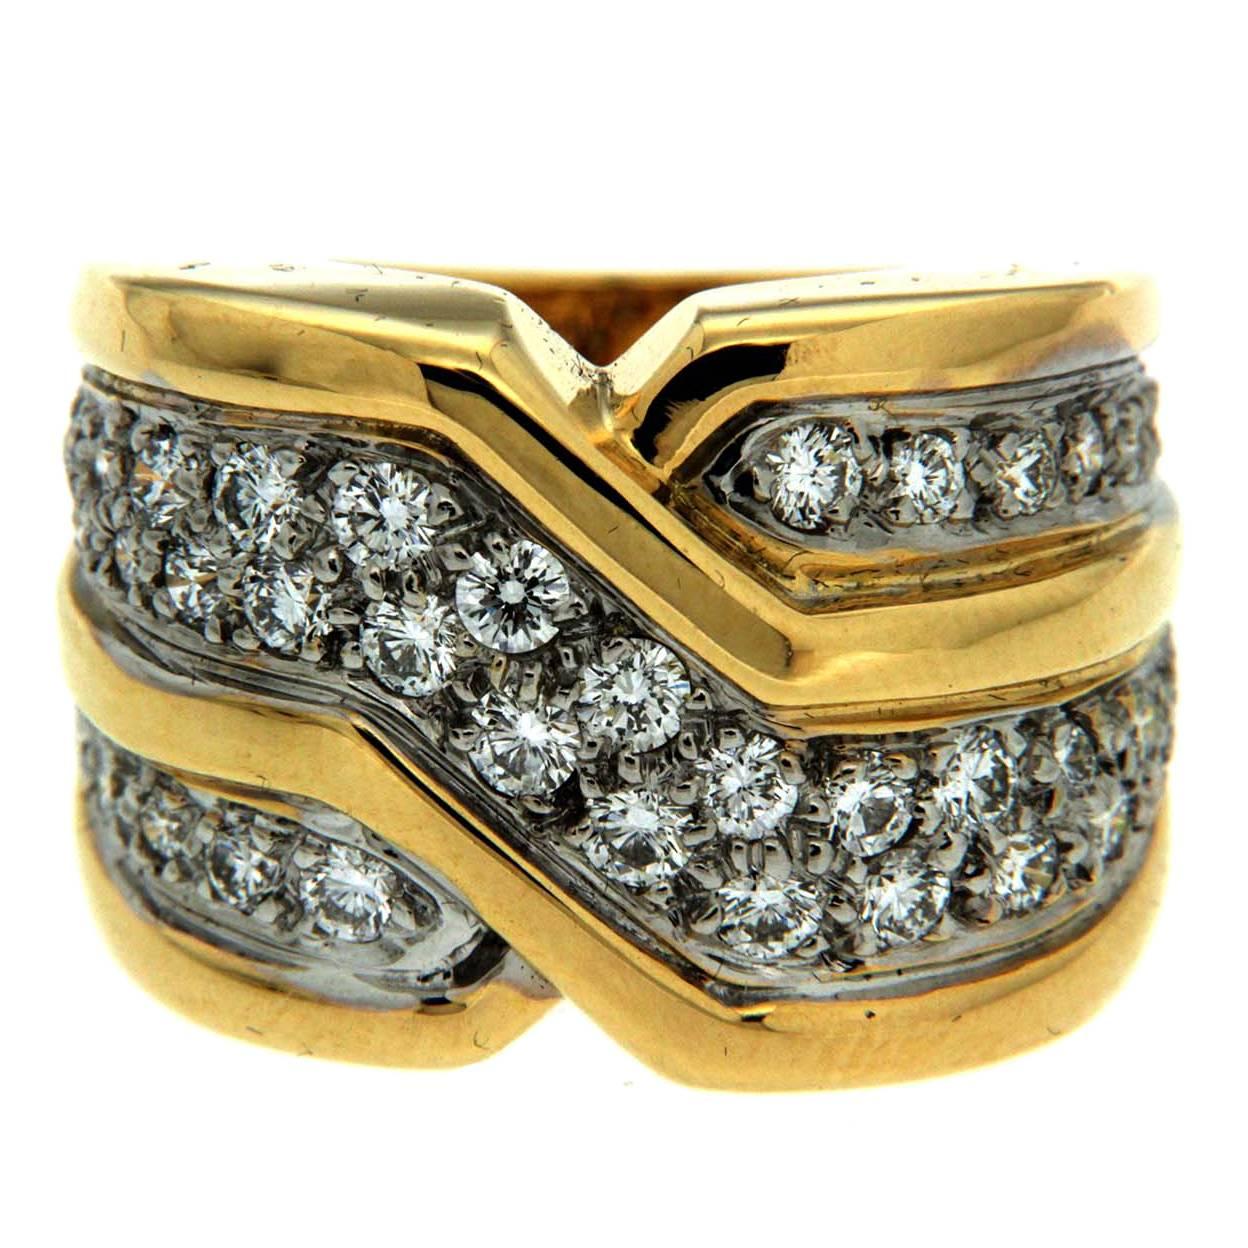 On the Town Diamond Gold Ring 